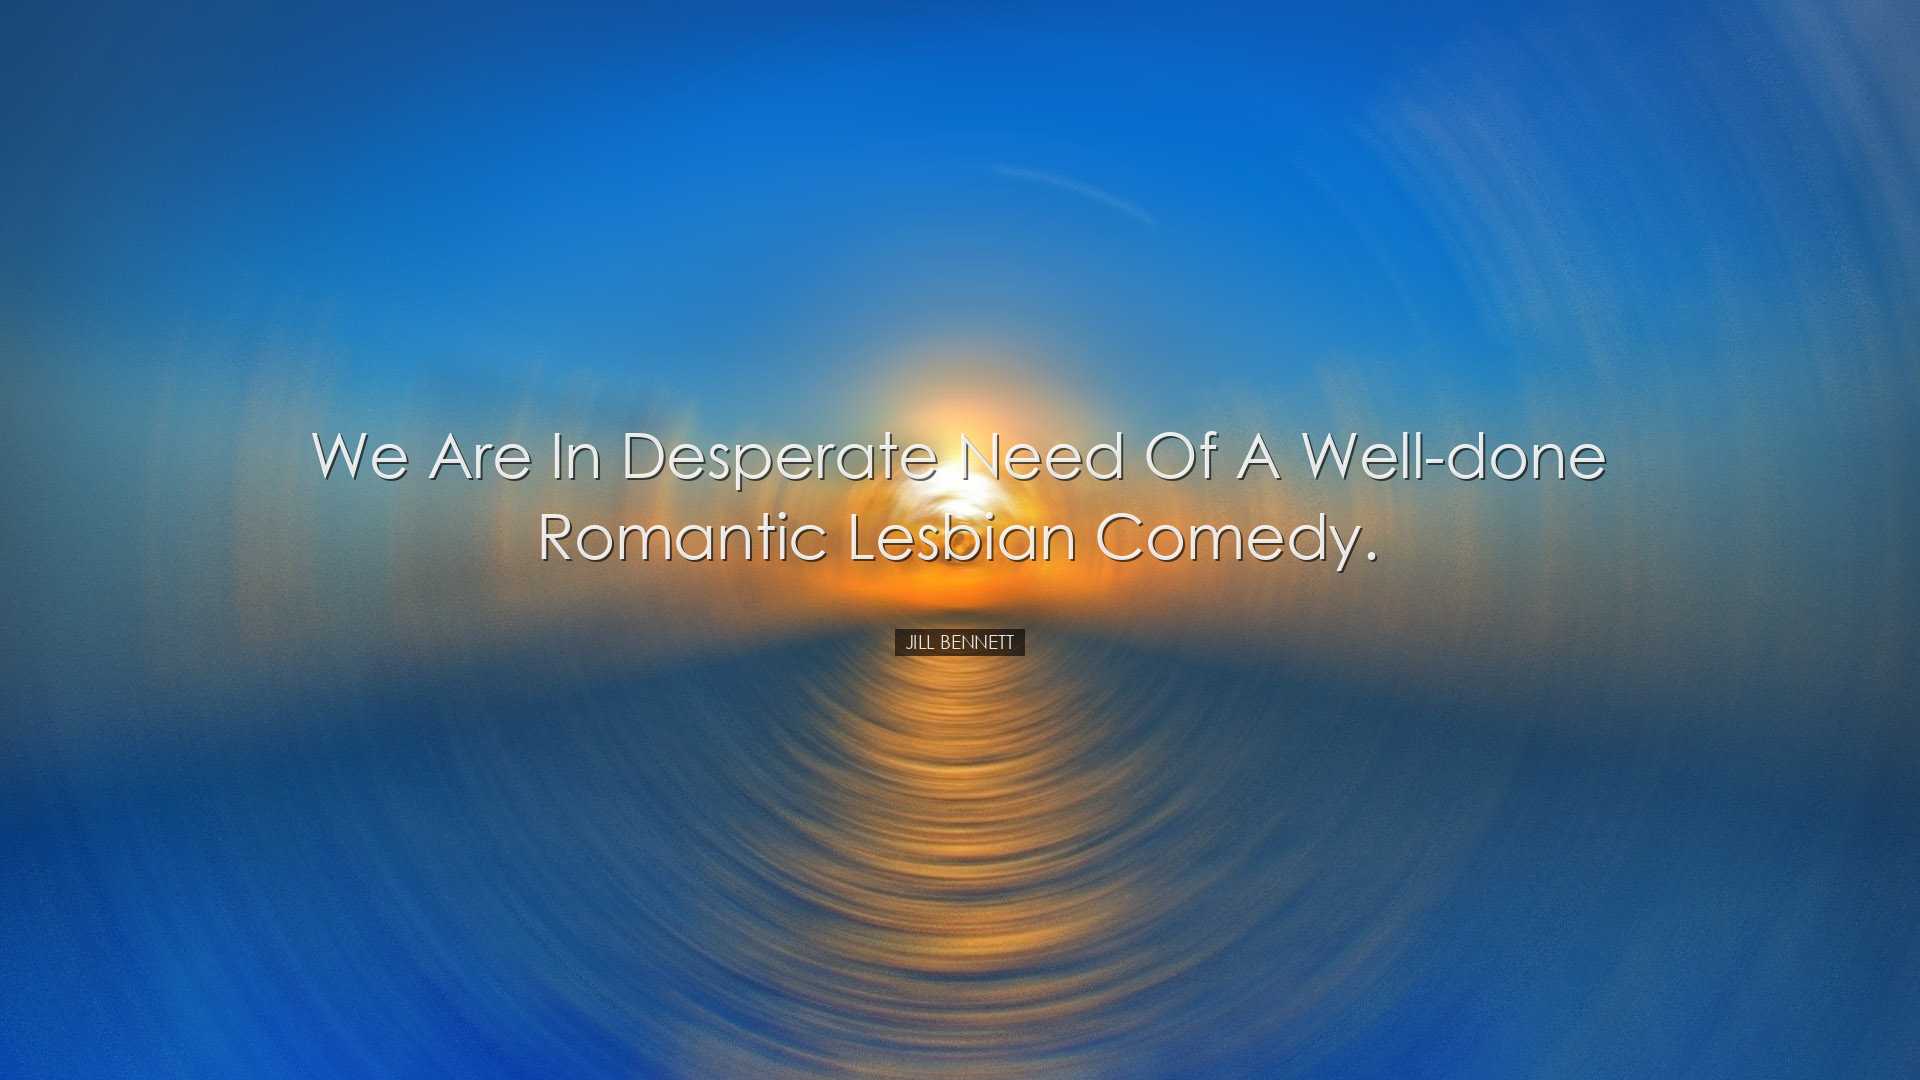 We are in desperate need of a well-done romantic lesbian comedy. -